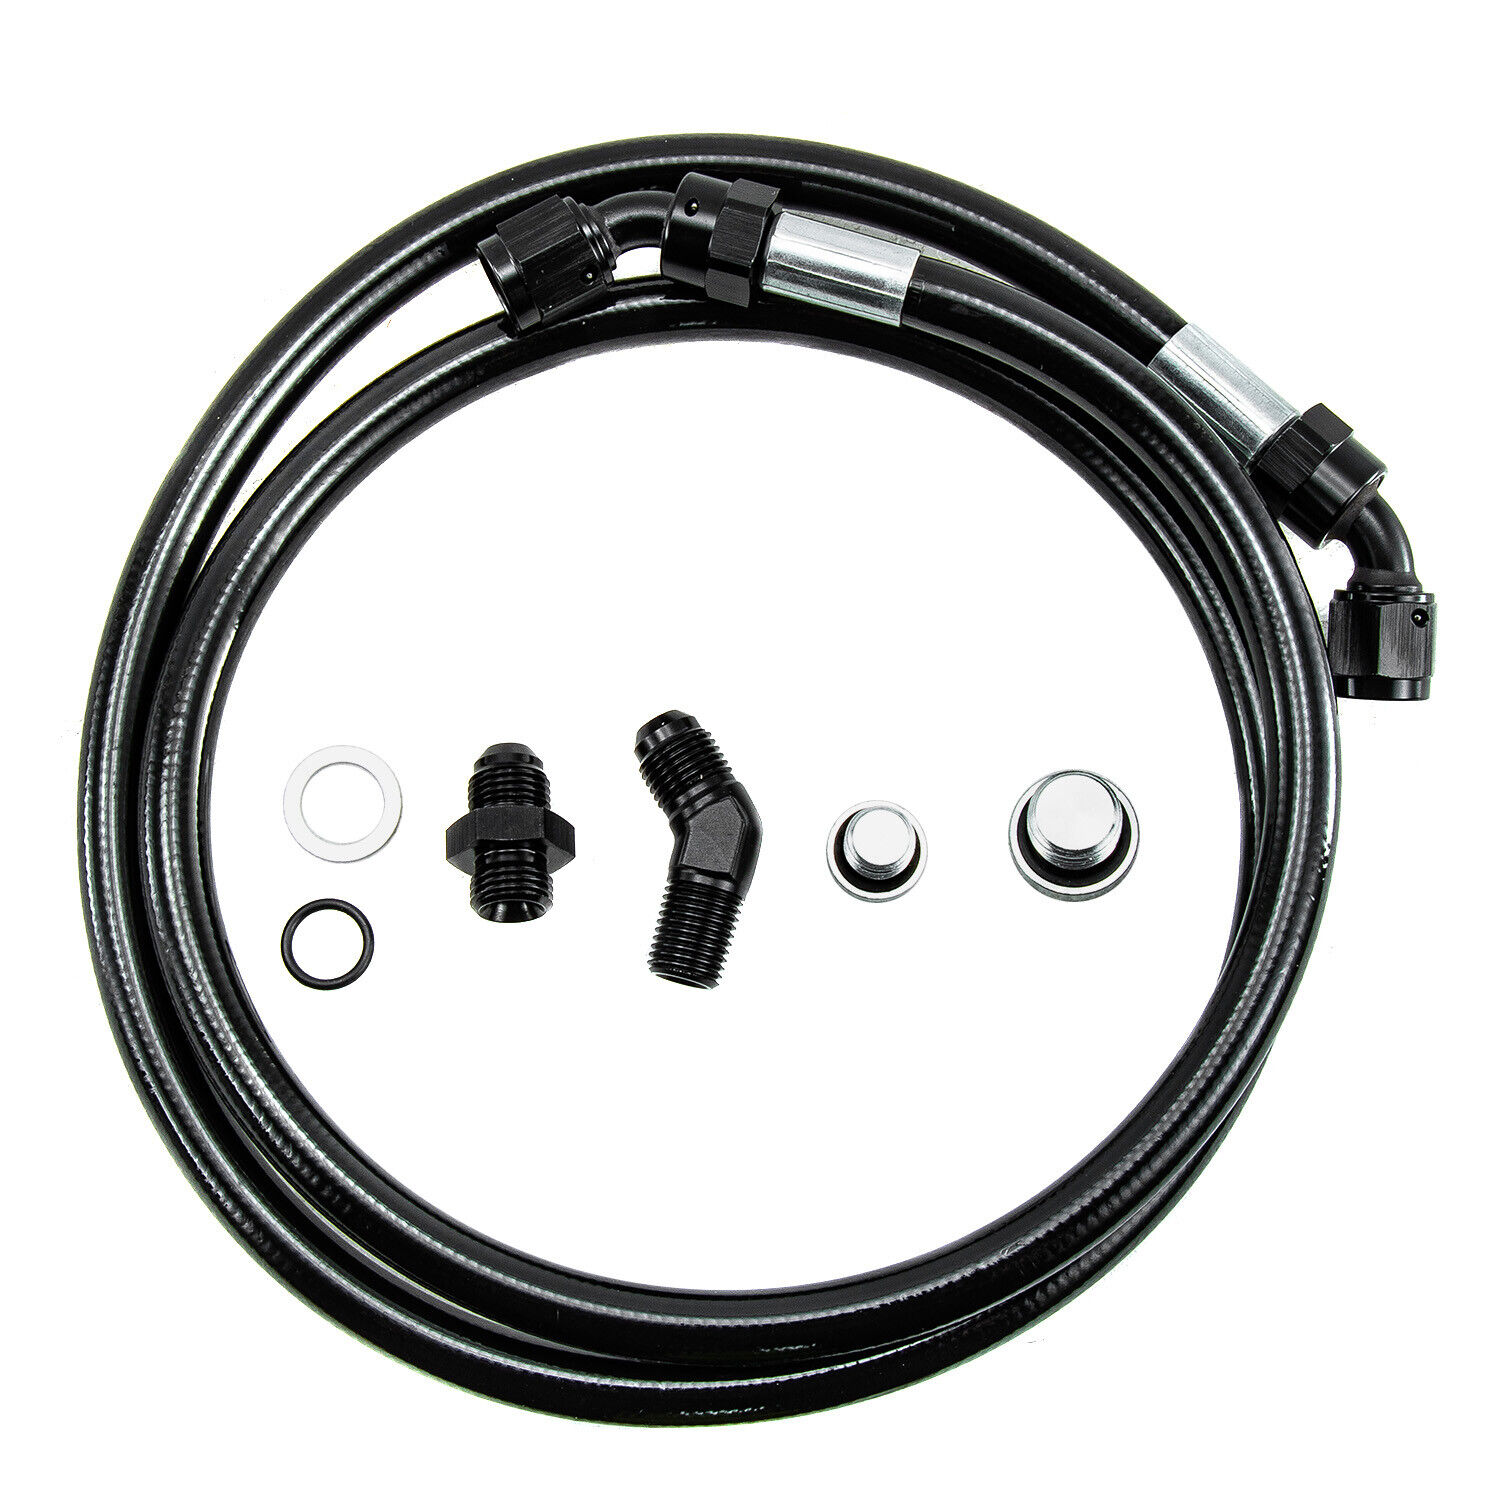 Remote Turbo Oil Feed Line Kit For 2004-10 GM 2500 3500 LB7 LLY 6.6L Duramax